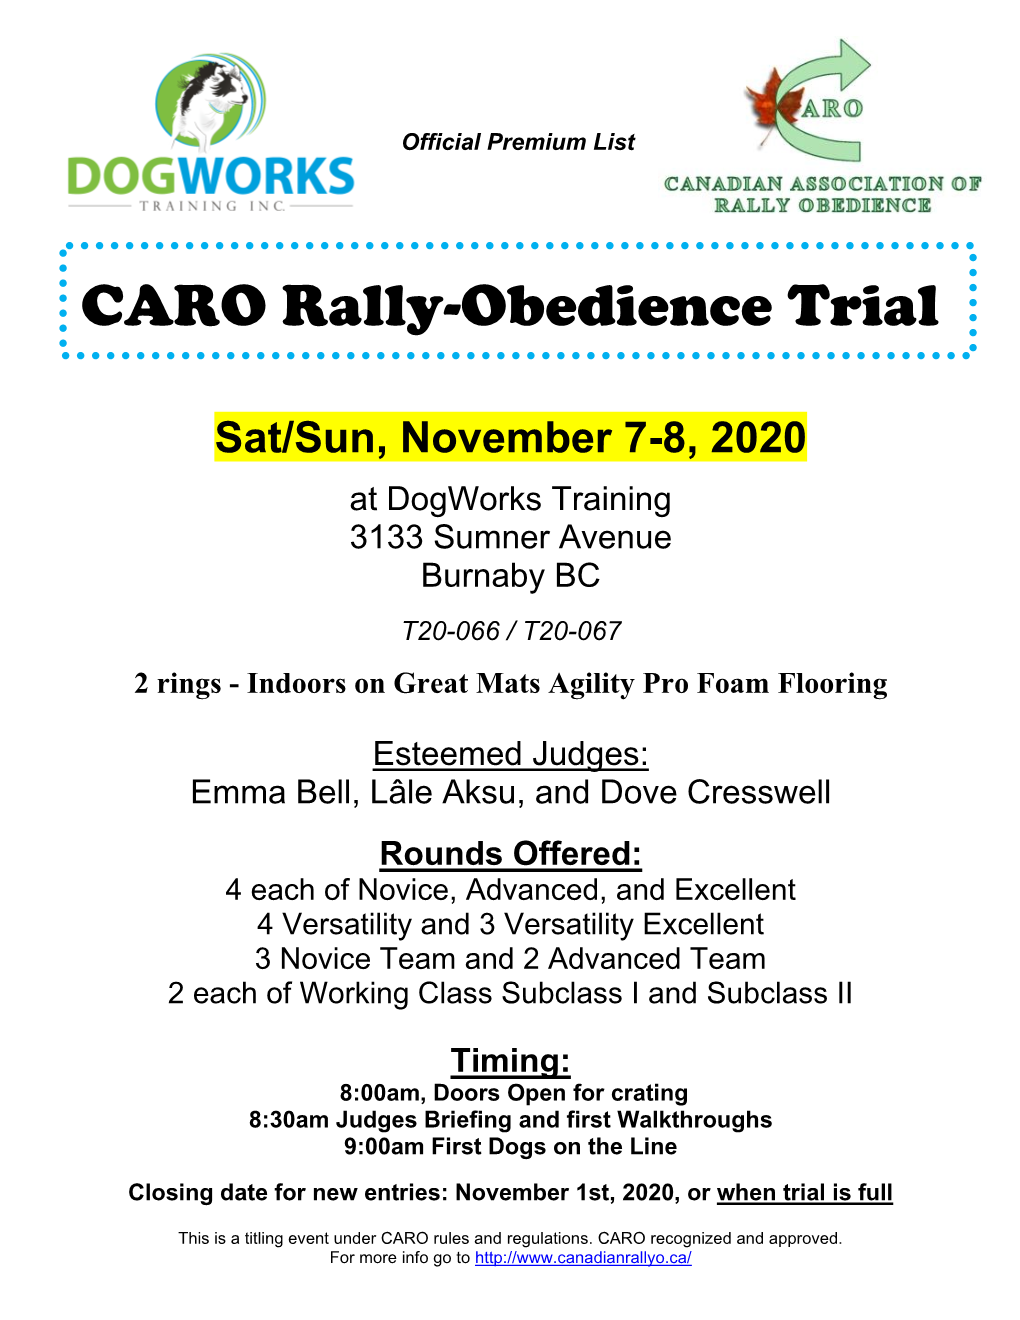 Canadian Association of Rally Obedience (CARO) in the Effect at the Time of This Entry, and by Any Additional Rules and Regulations Set out by Dogworks Training Inc